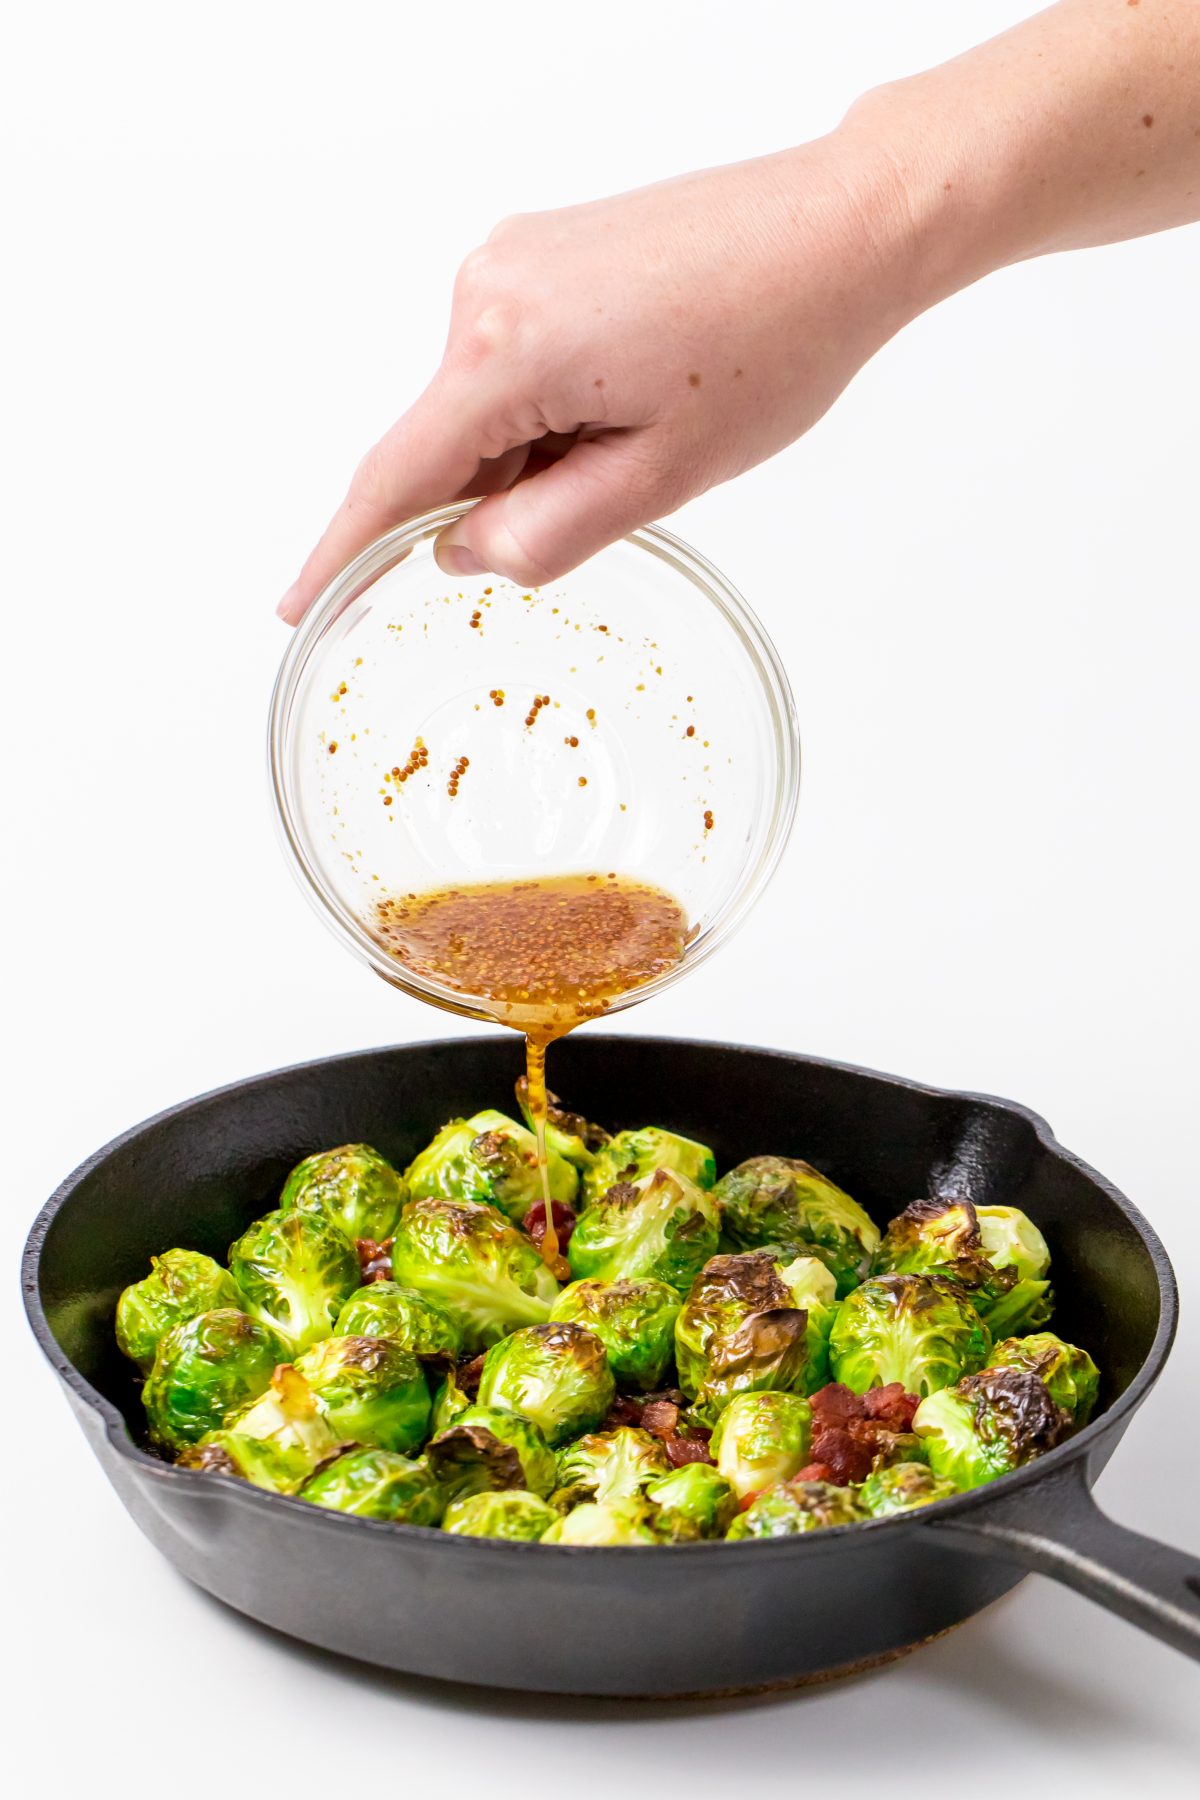 Pour maple syrup mixture over bacon and brussels sprouts